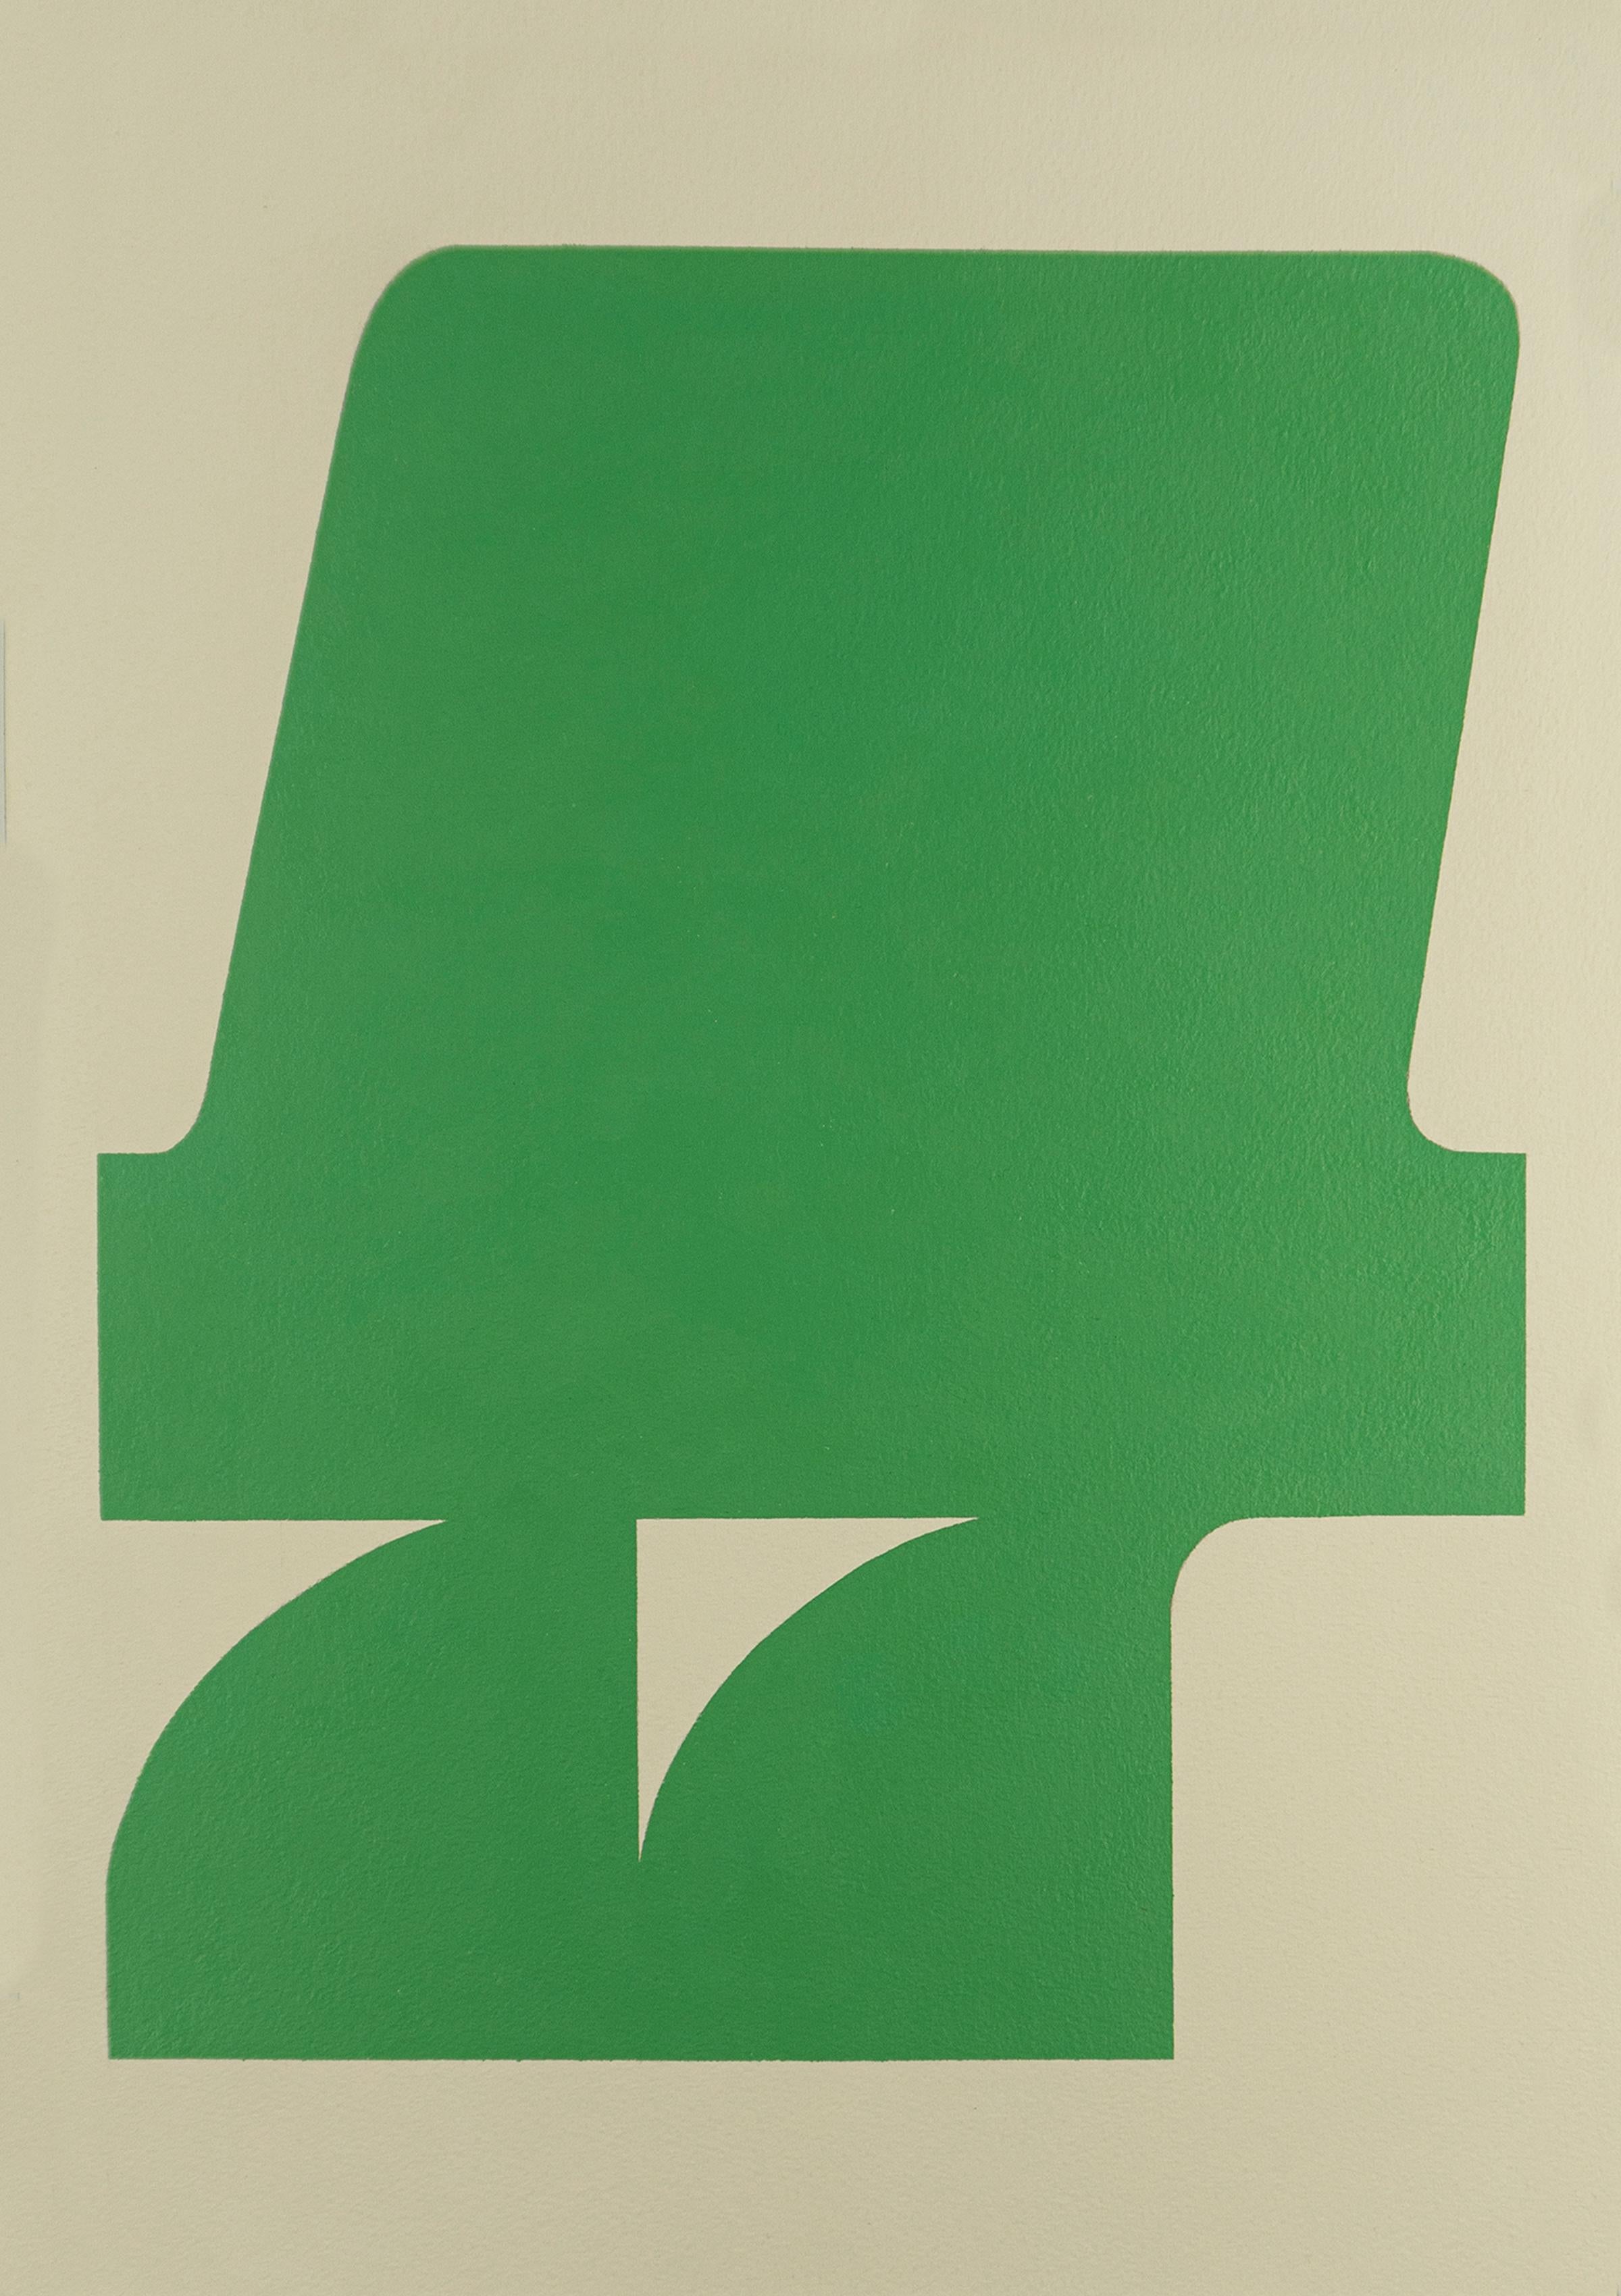 Shape 12 (2019) - Abstract shape, minimalist gestural, green & white on paper